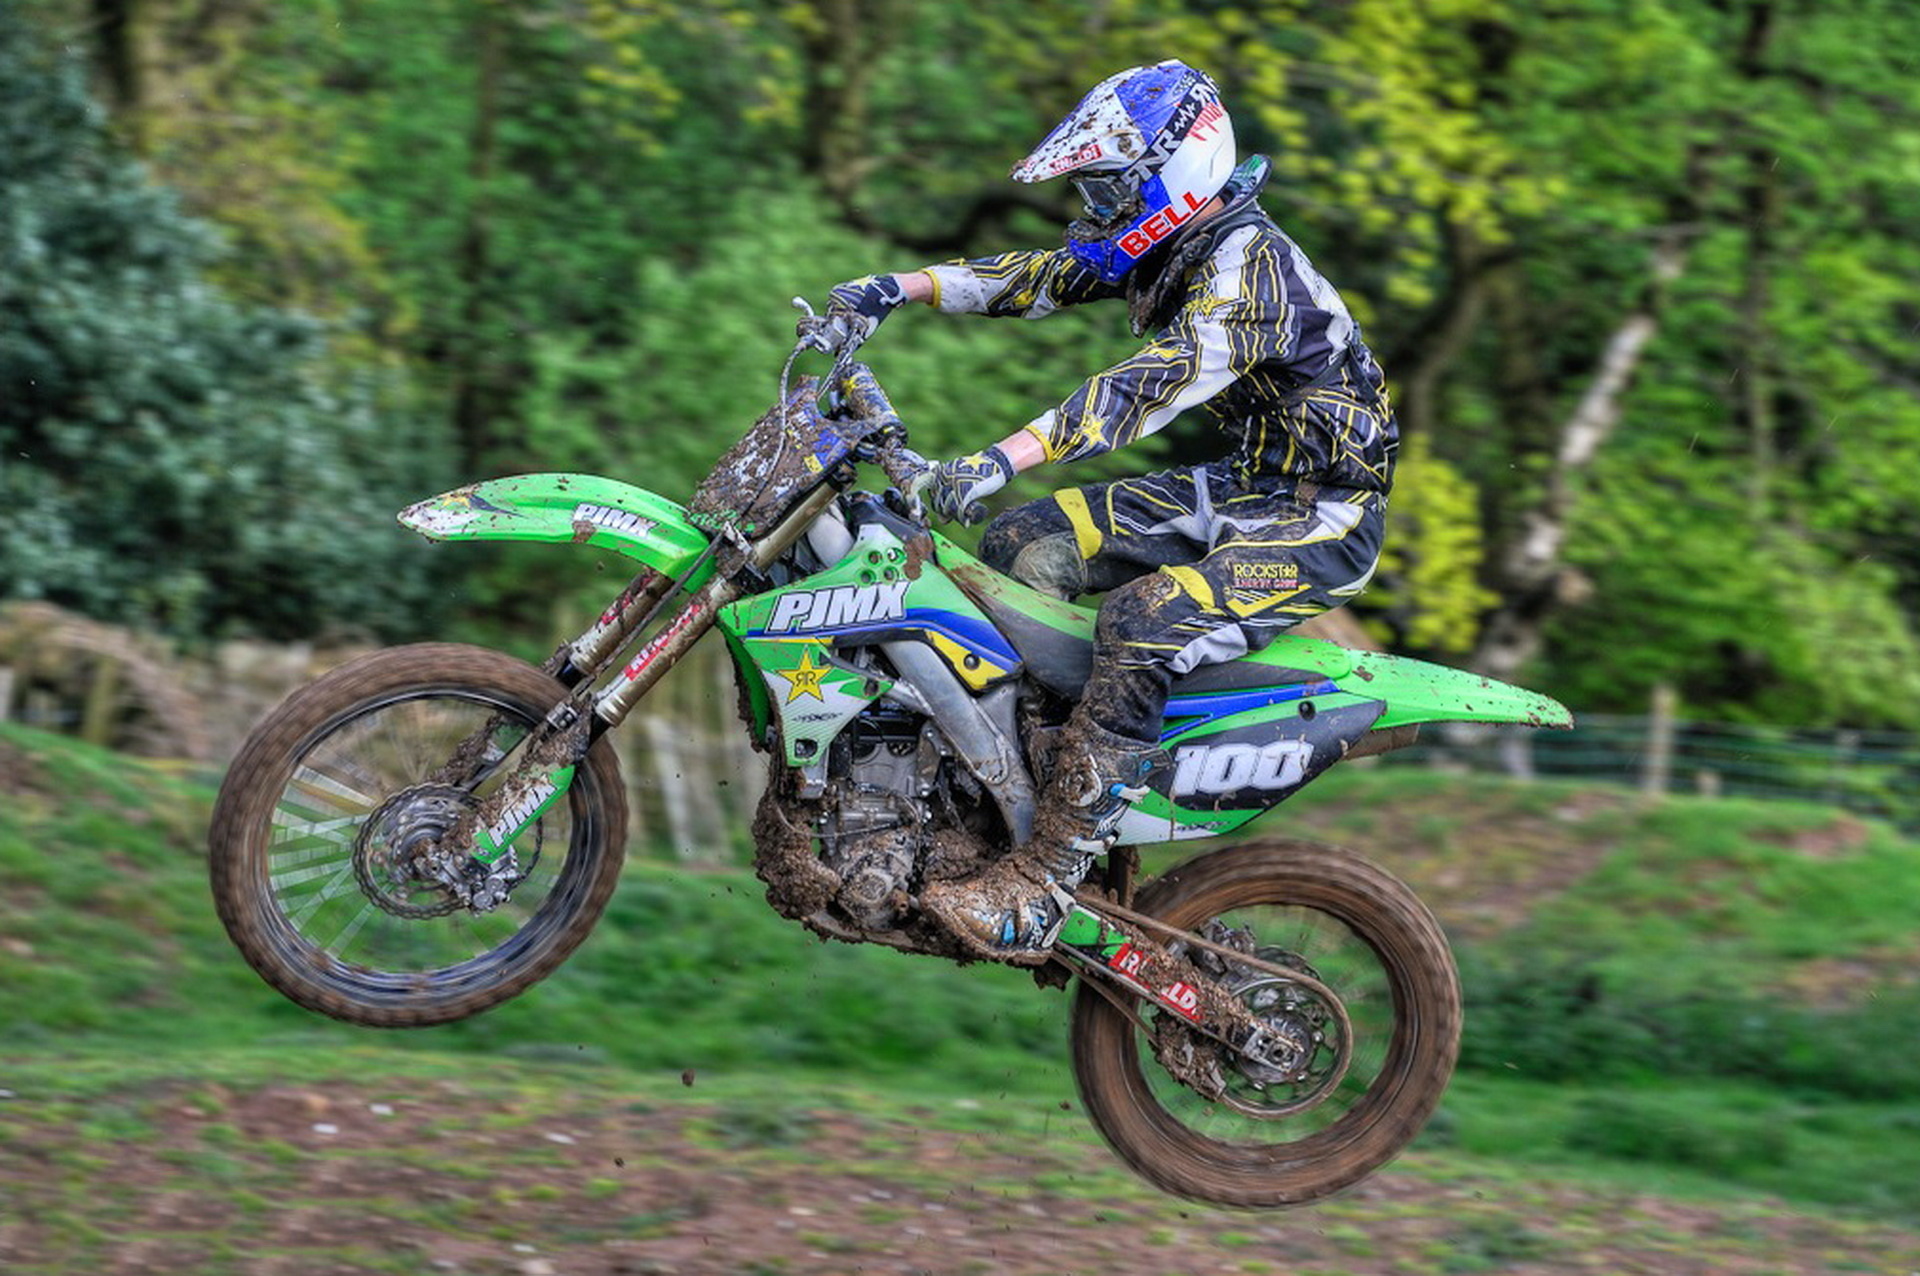 motocross, motorcycles, motorcycle, racer, competitions